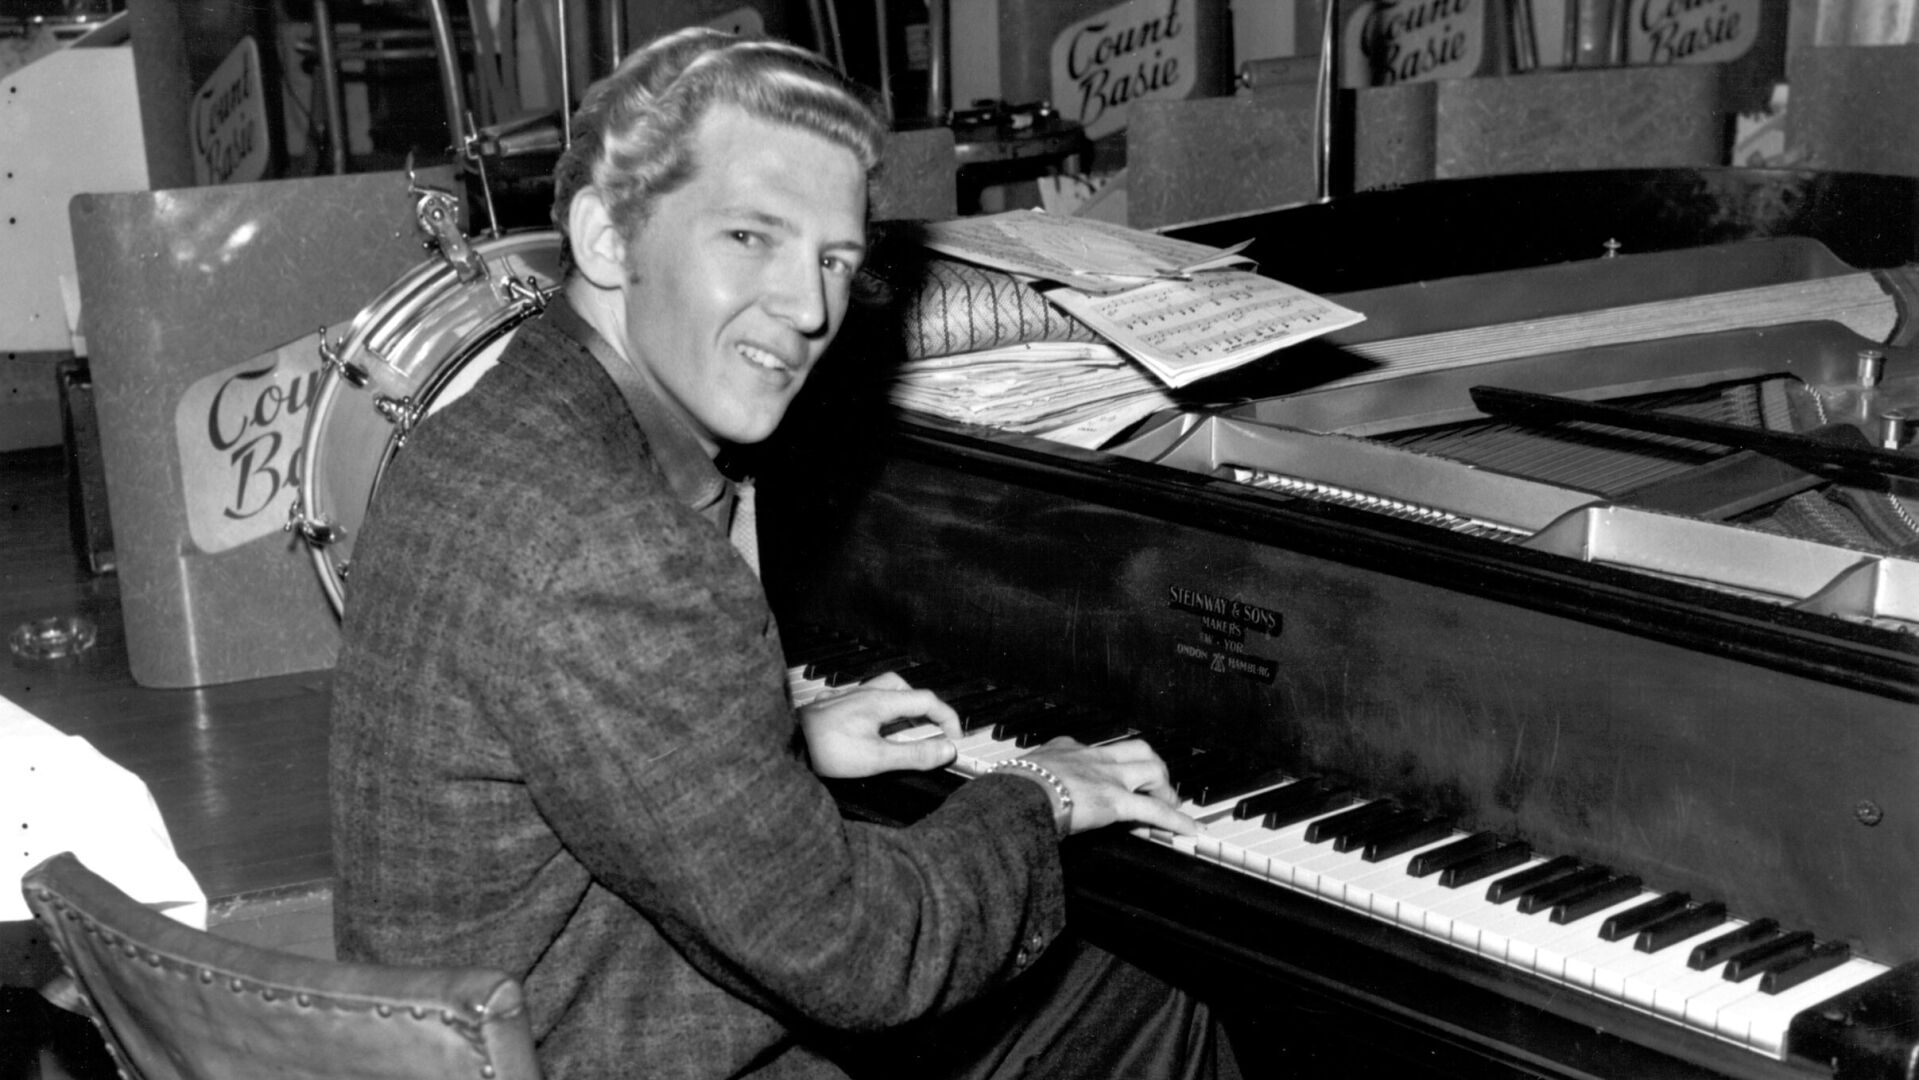 Jerry Lee Lewis, rock 'n' roll pioneer who sang 'Great Balls of Fire,' dies at 87 | News | kq2.com